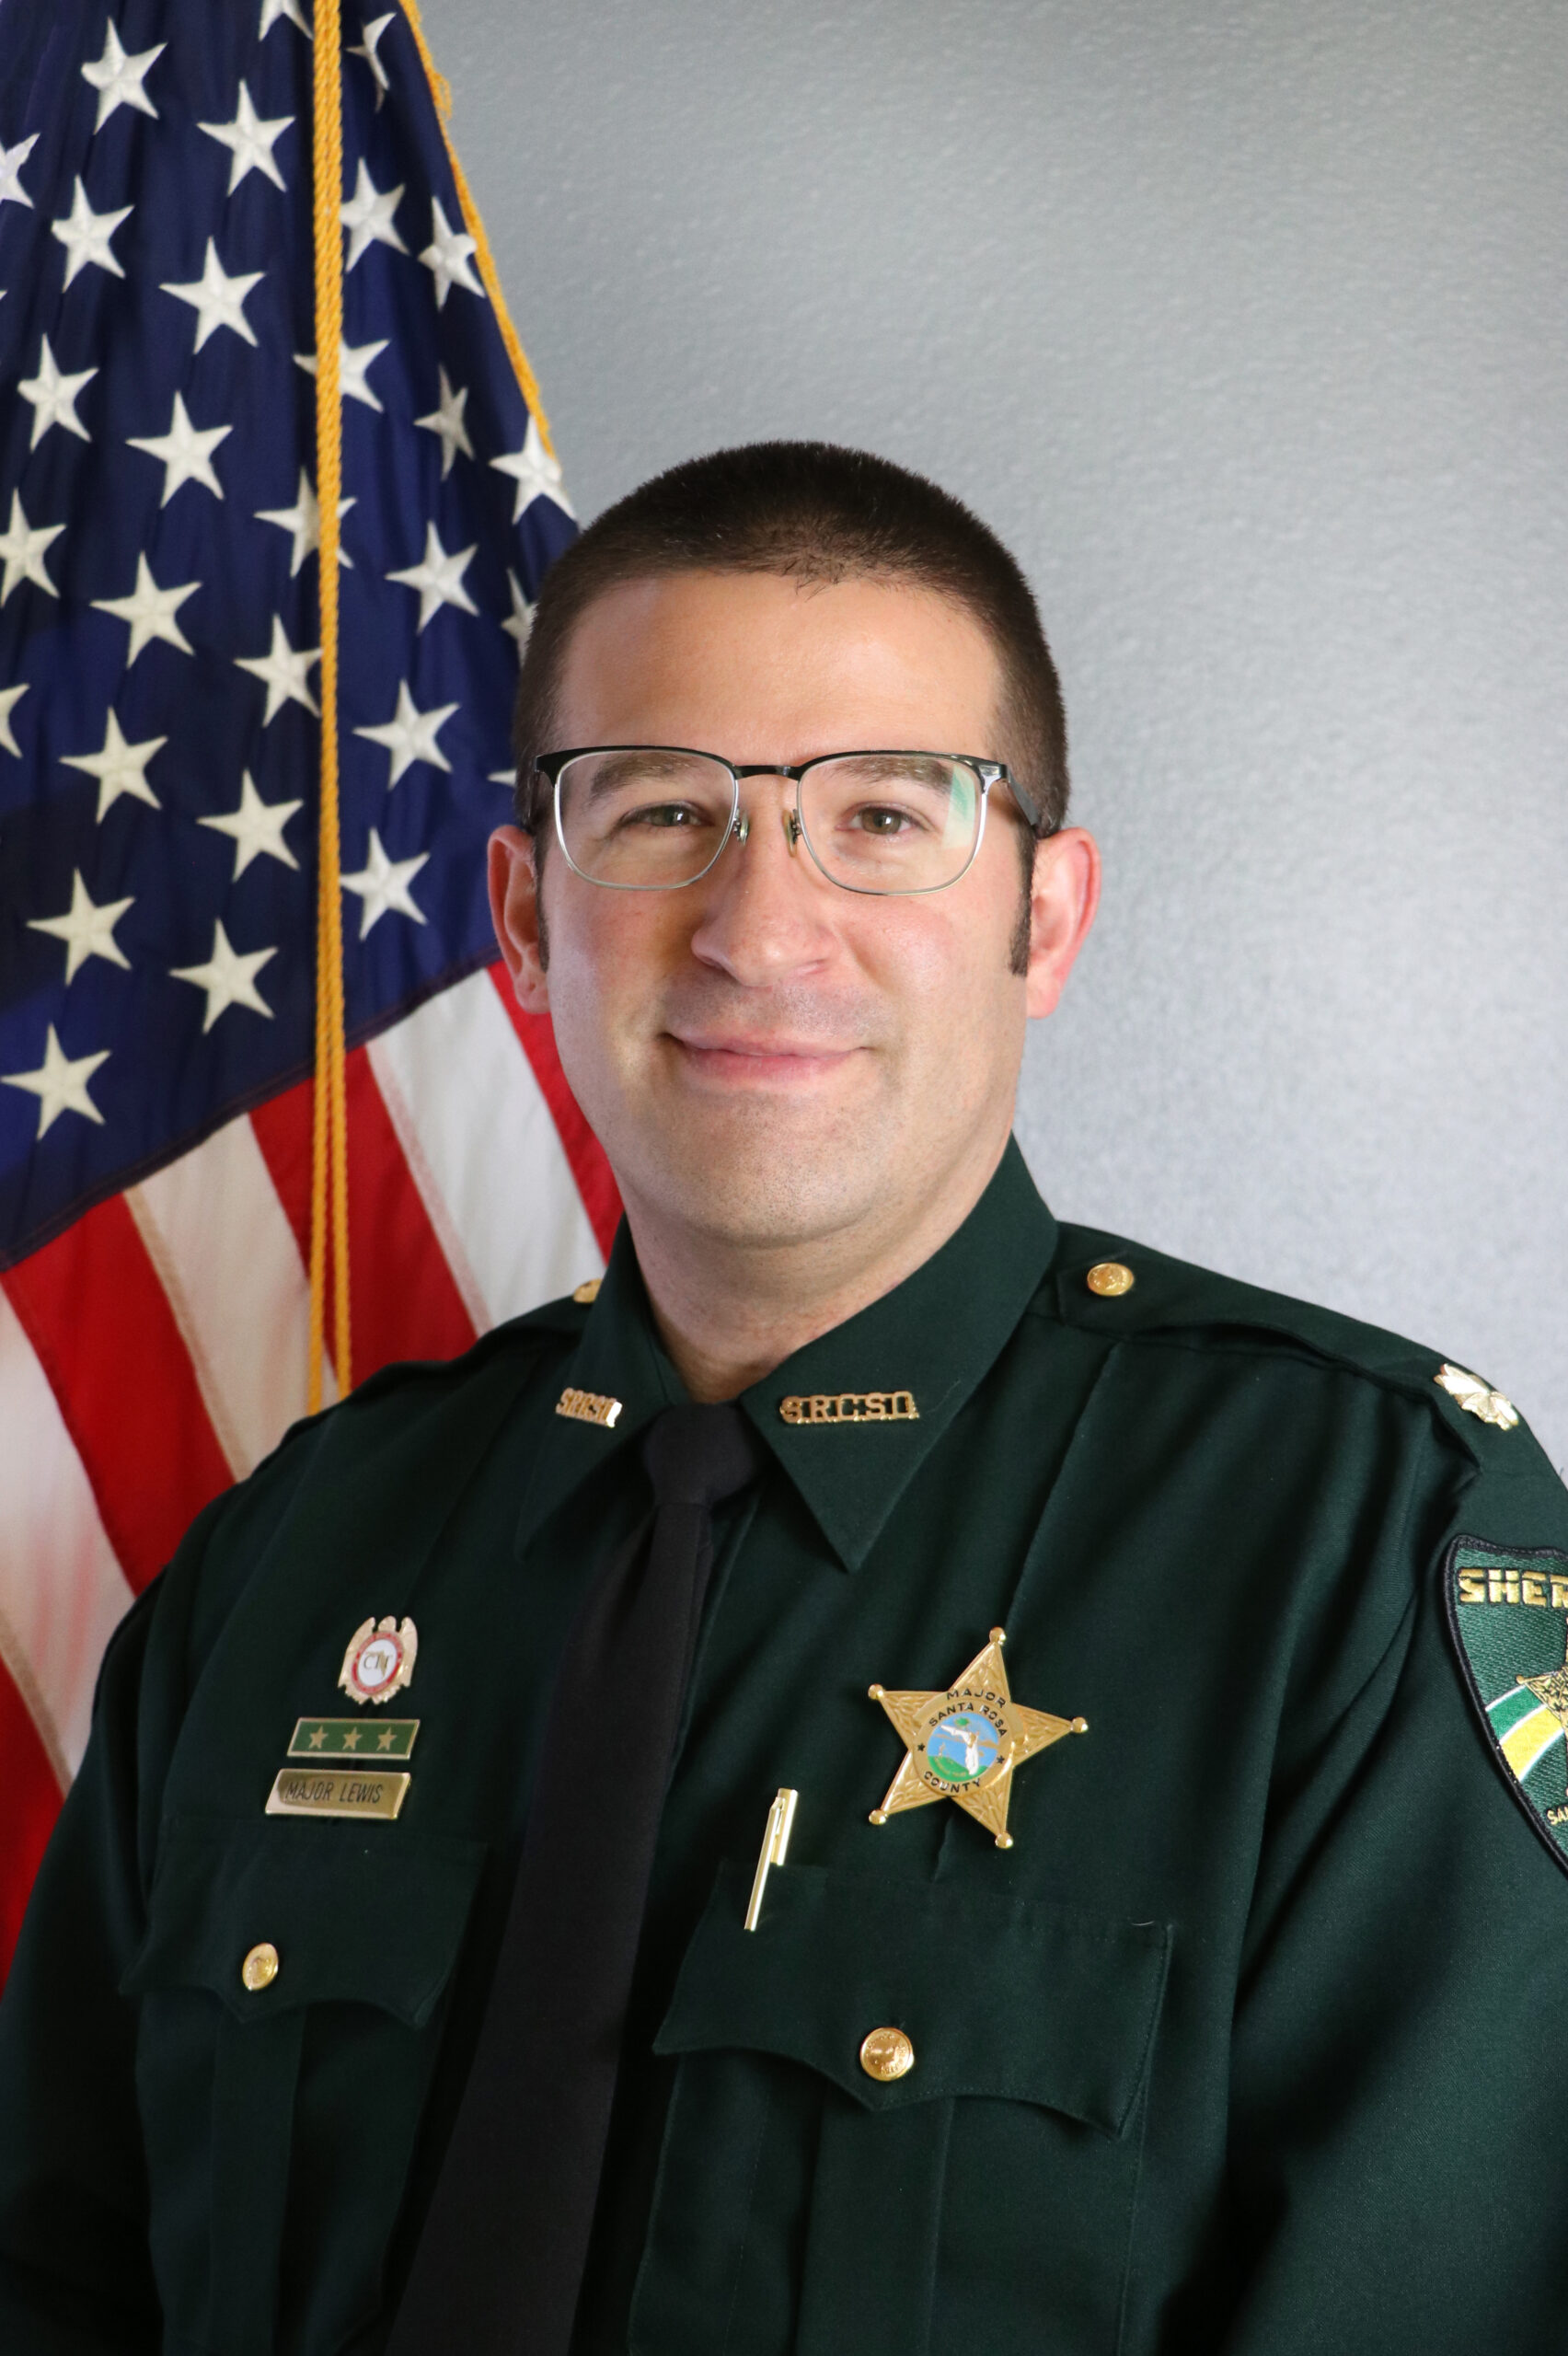 A smiling sheriff's deputy in uniform, standing in front of an american flag.